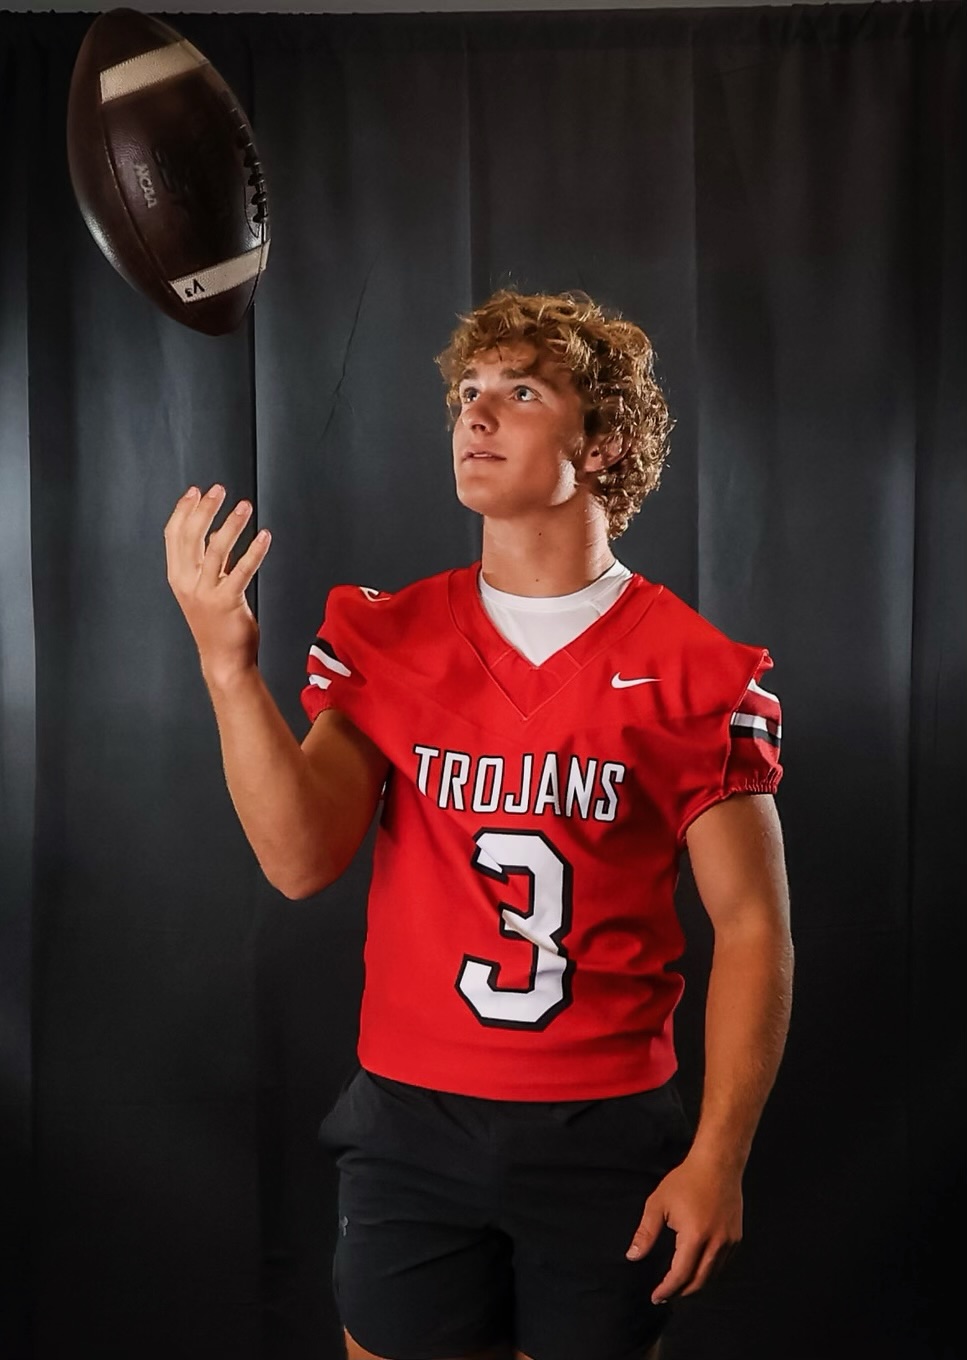 Athlete of the Month: Noah Coy